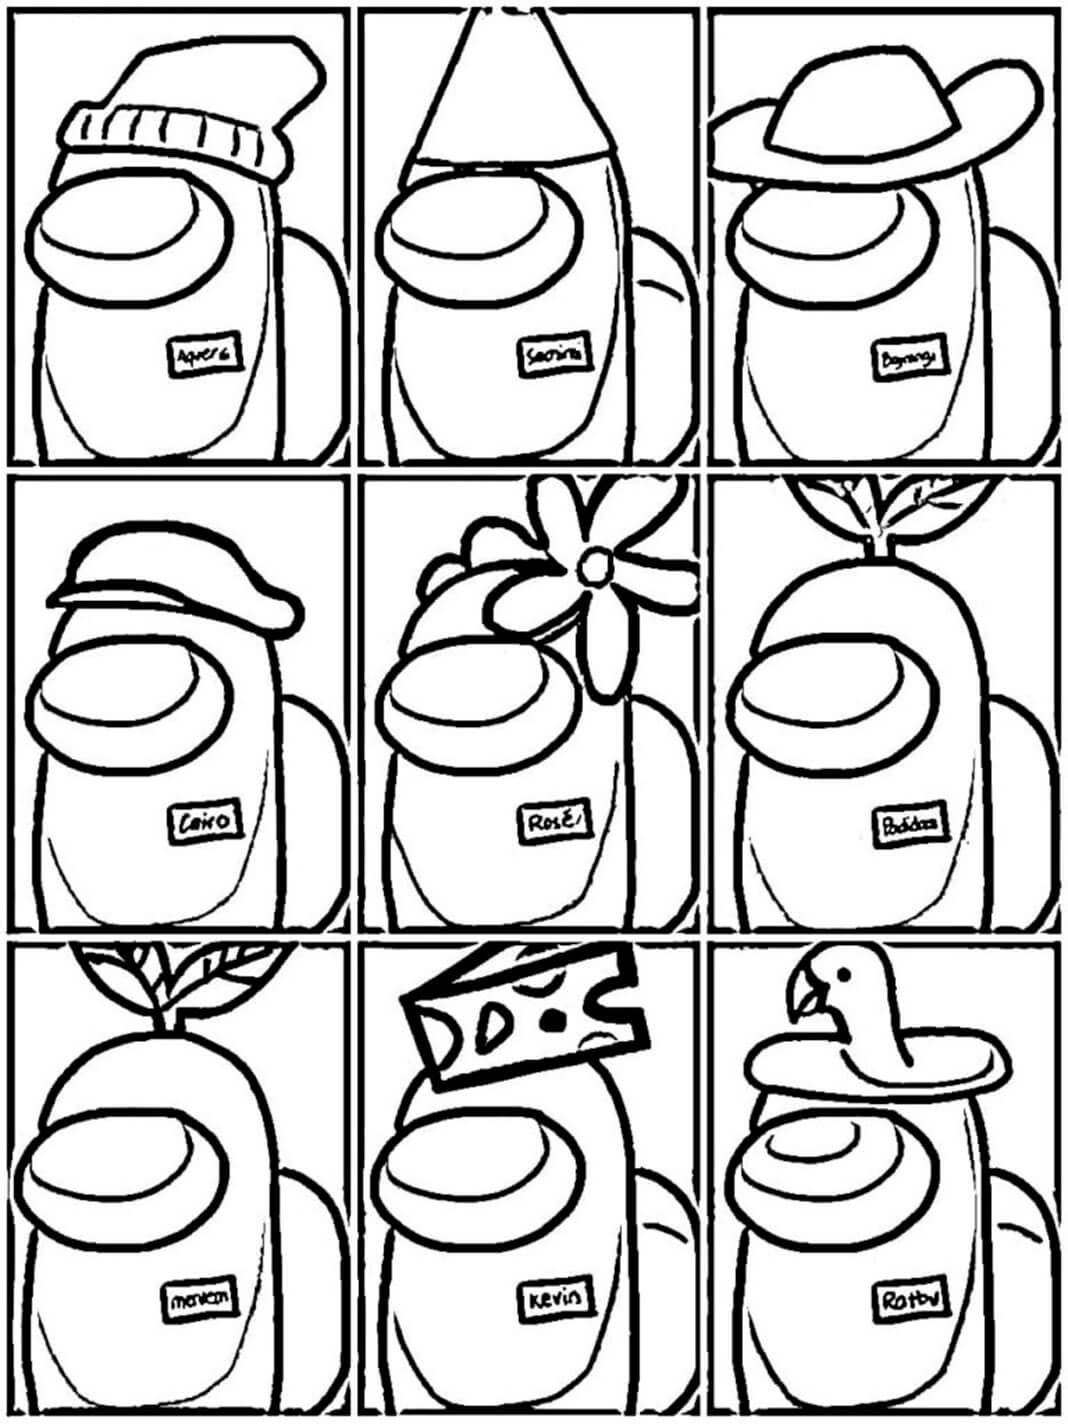 Among Us Coloring Pages   Free Printable Coloring Pages for Kids